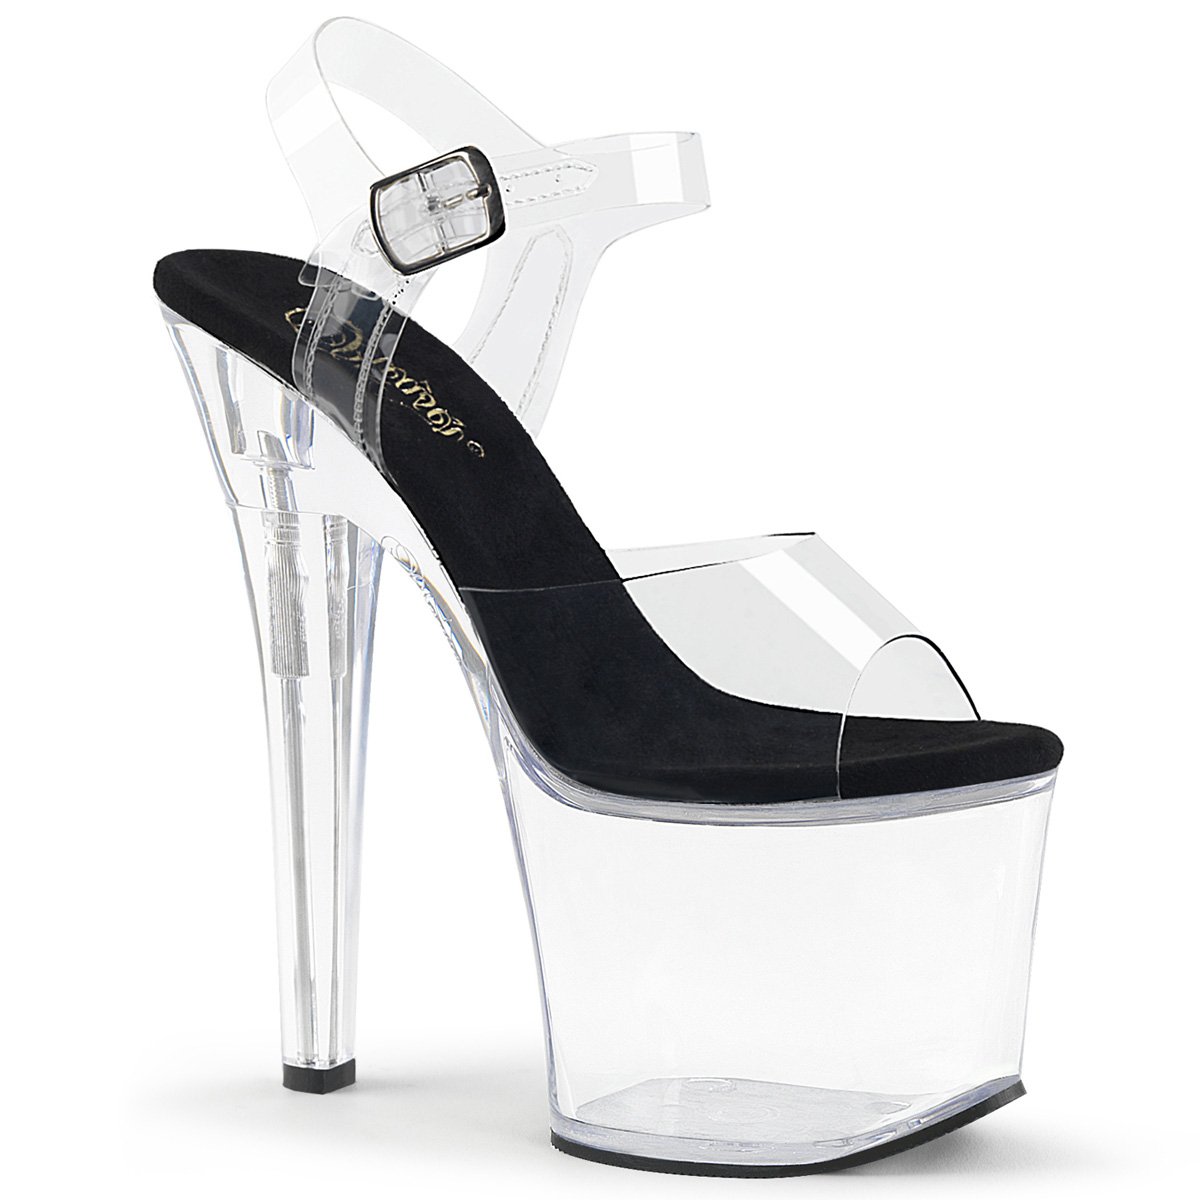 Pleaser Radiant-708 Platforms | Buy Sexy Shoes at Shoefreaks.ca